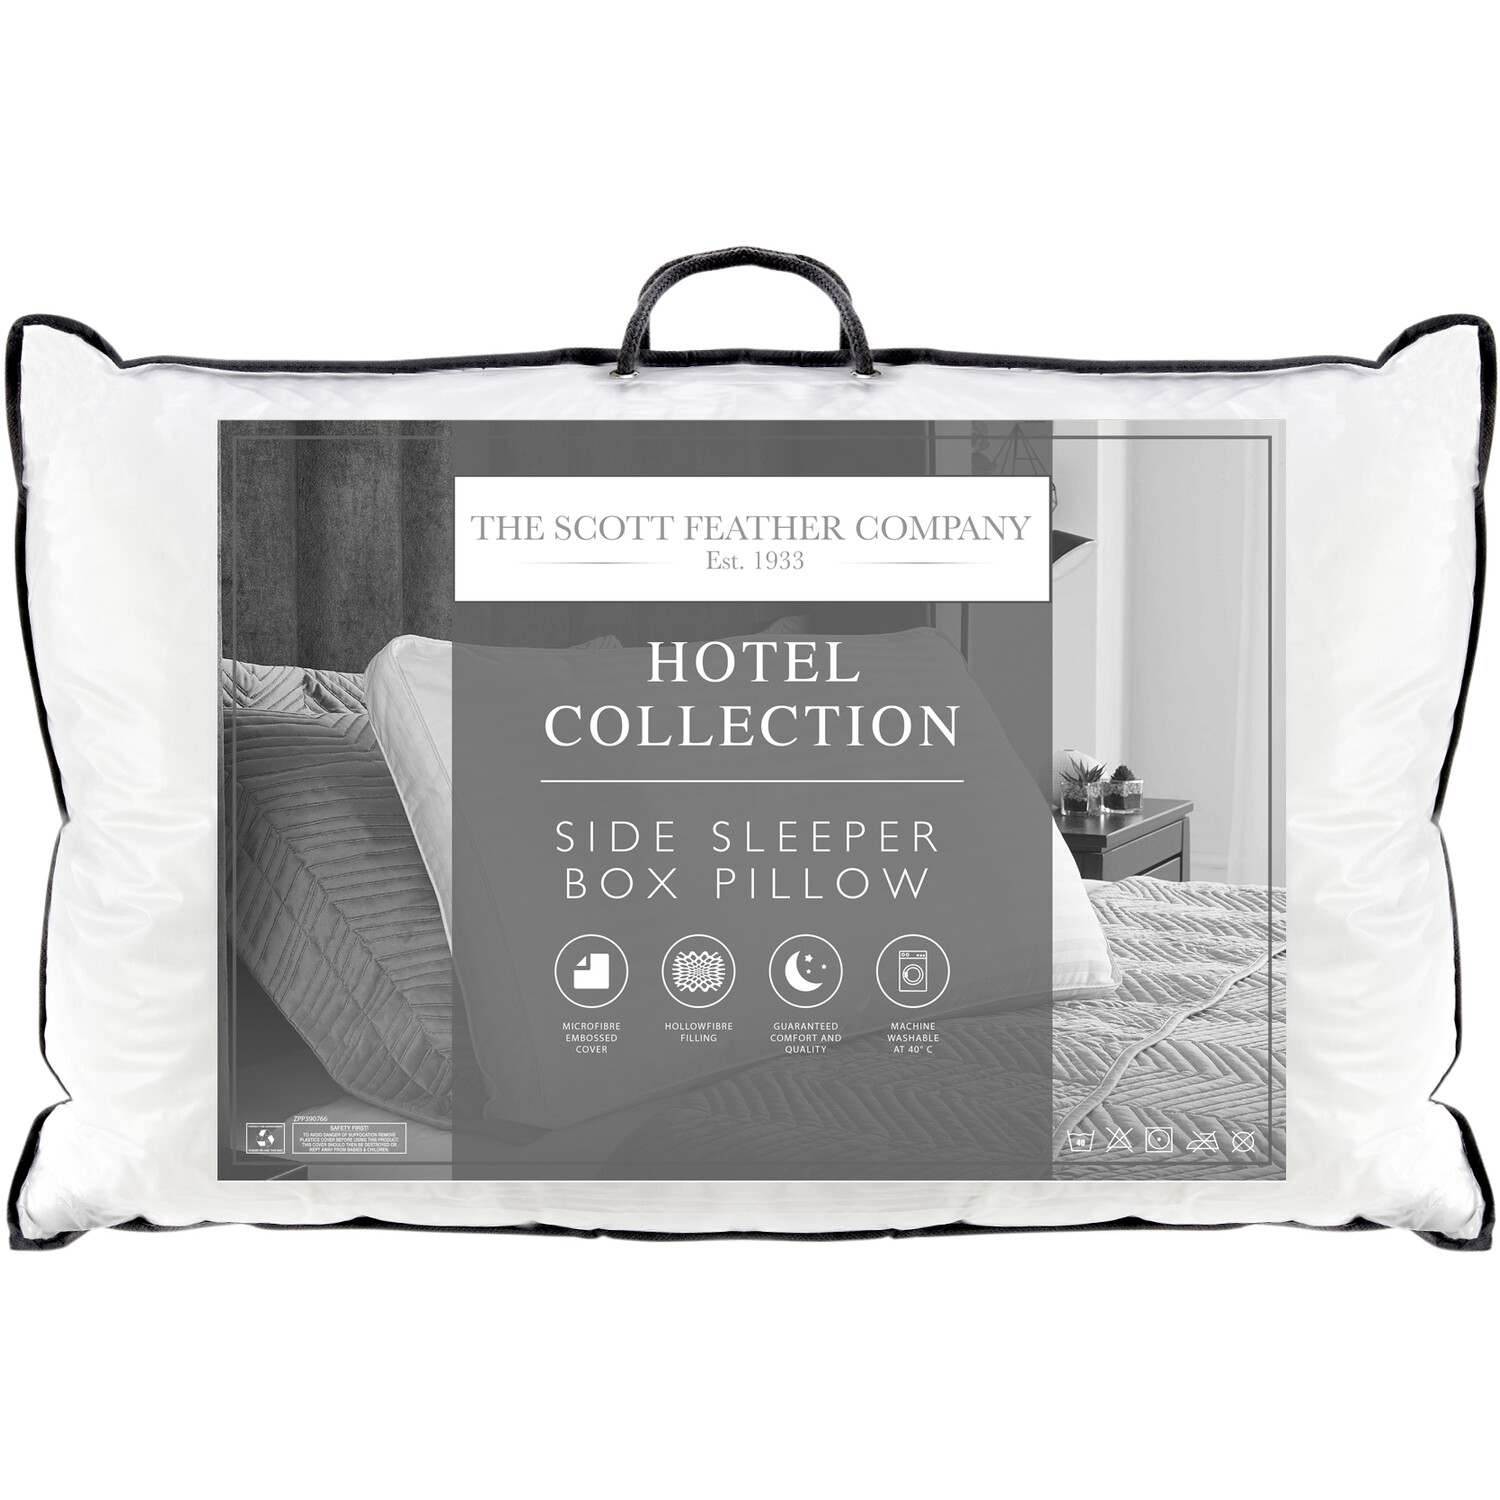 The Scott Feather Company Hotel Collection White Pillow 40.4 x 70.5cm Image 1